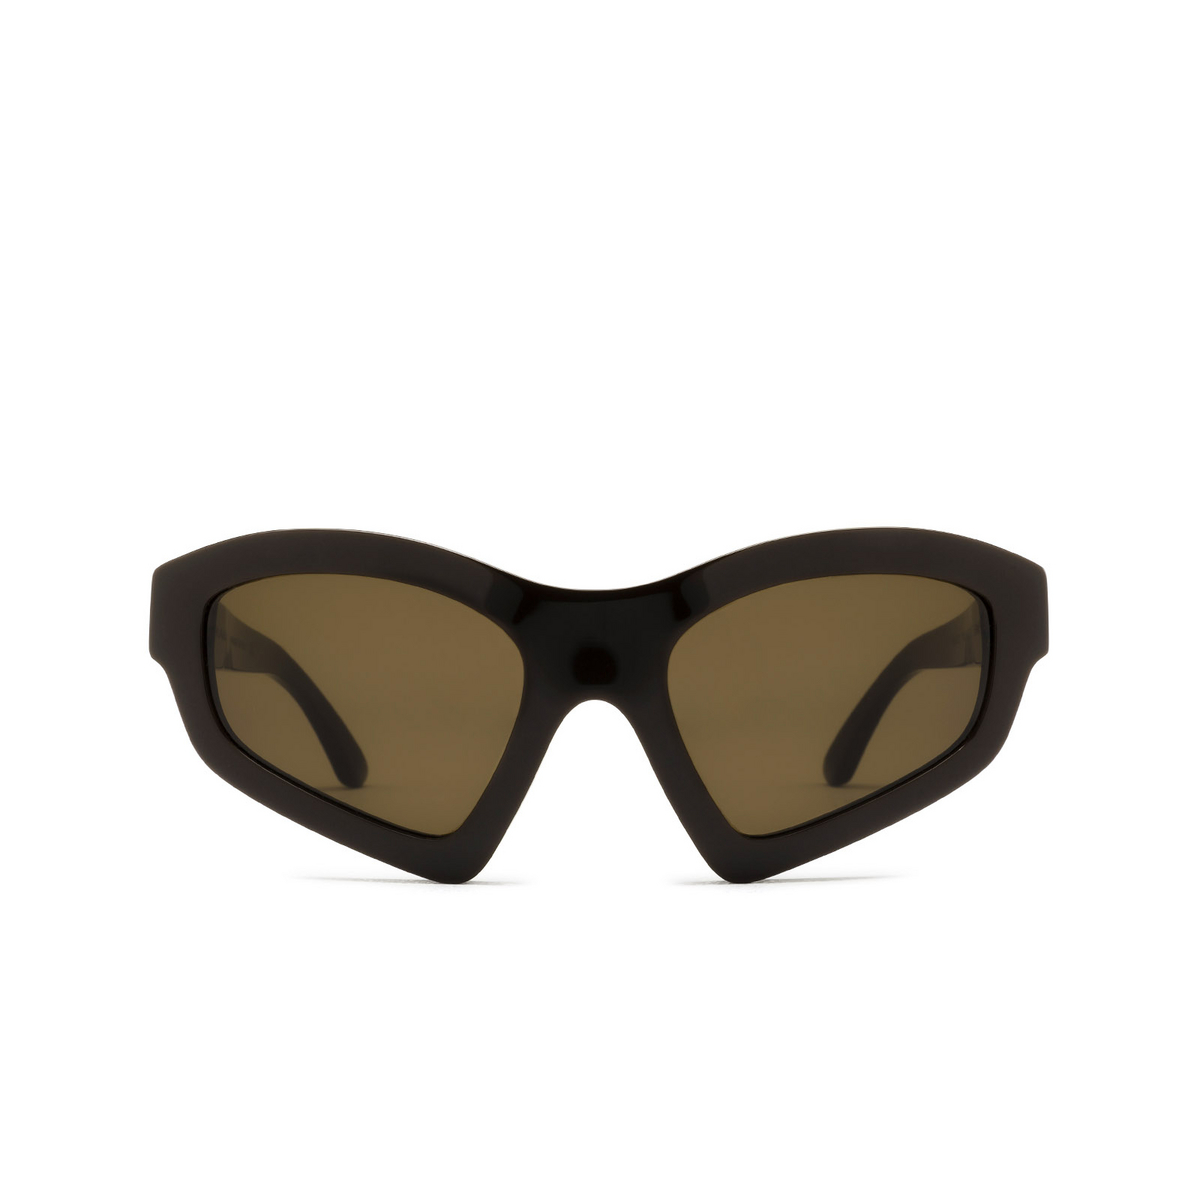 Huma ENNE Sunglasses 22 Chocolate - front view